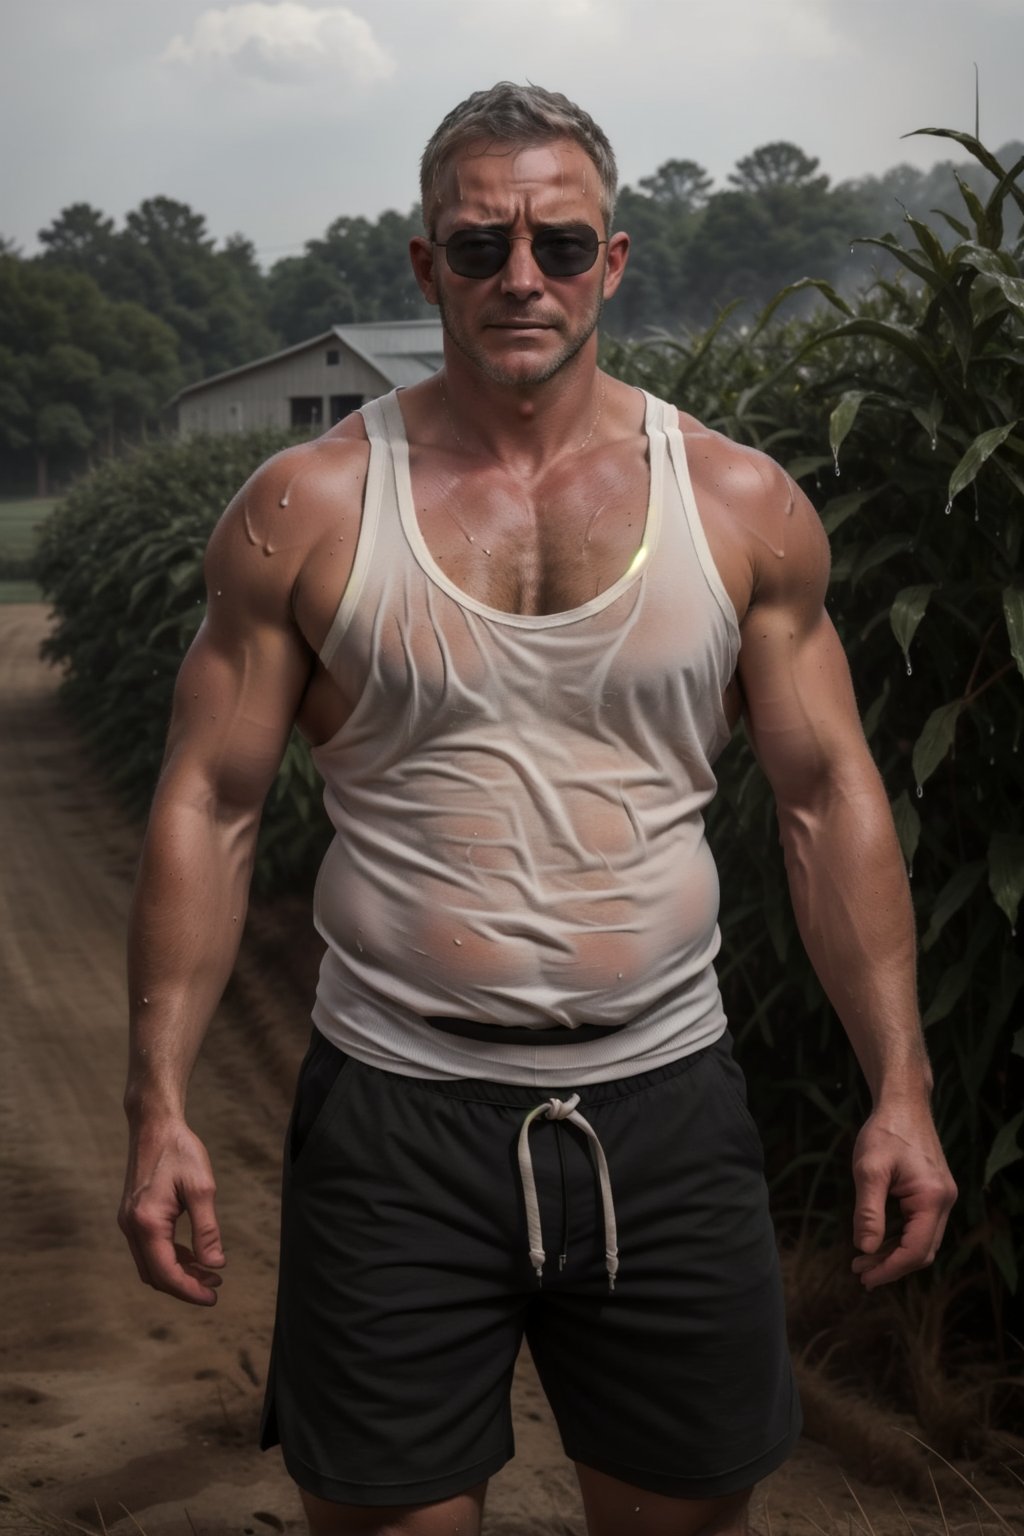 ((realistic)) ,55 years old, 185cm, 45kg, 10% body fats, handsome, man ,( tan_body), sunglasses, ((sweating)), farm, farmer, outdoor, (white tank_top), shorts, dark_skin, mature, corn filed ,body_hair, furry, wet_clothes, chubby, 